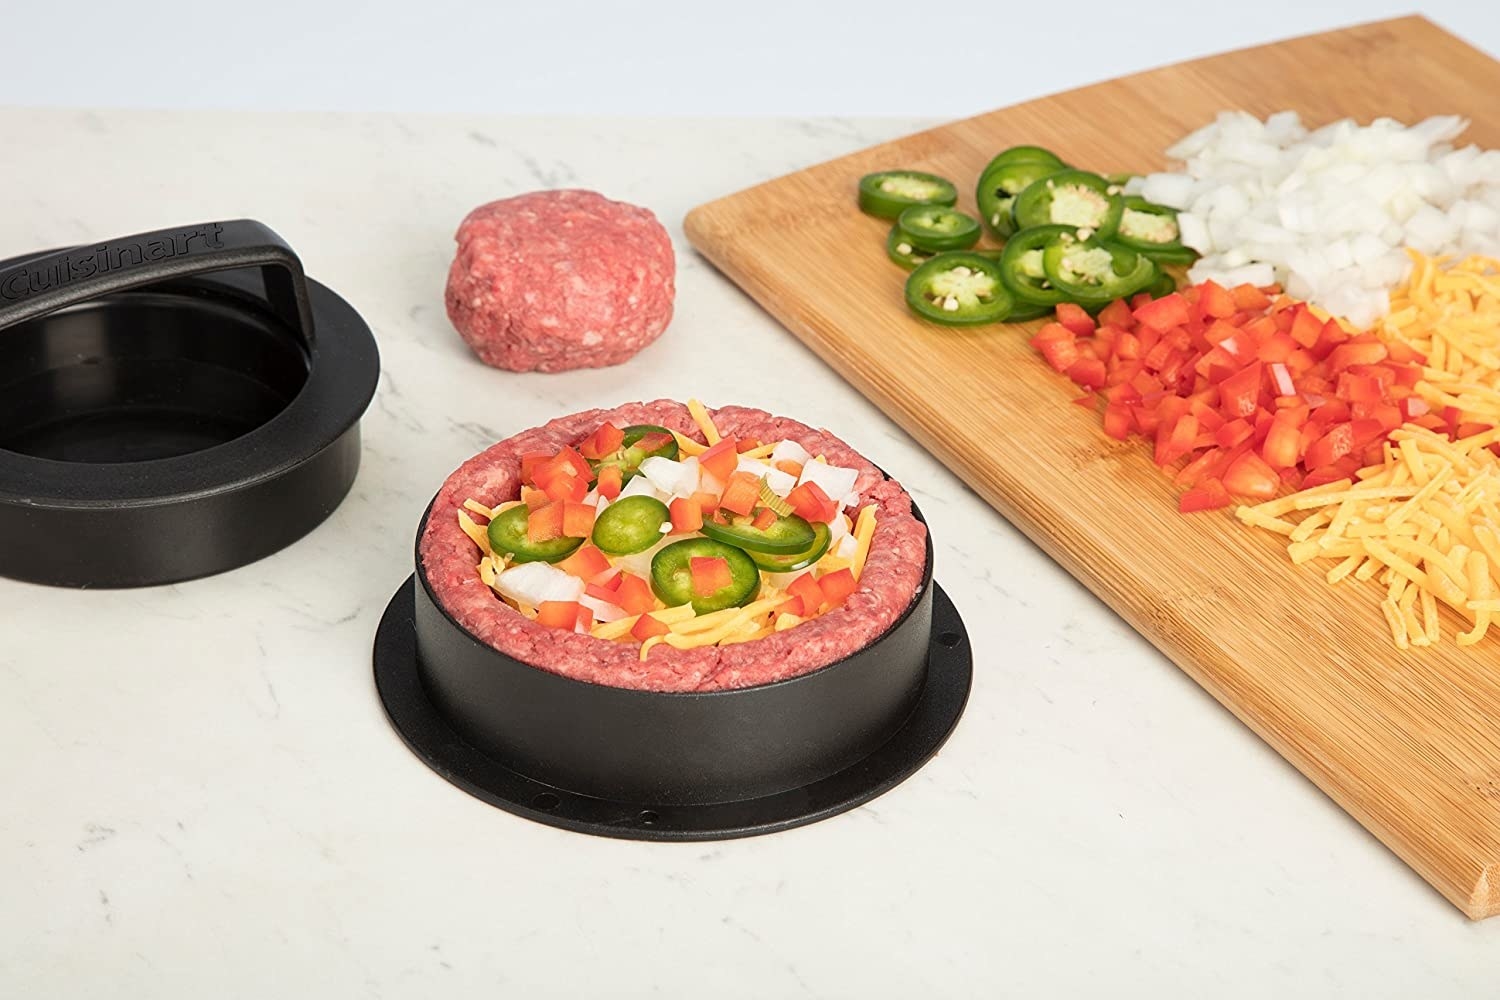 Black four-in-one burger press with ground meat, jalapeños, cheese, and onions inside